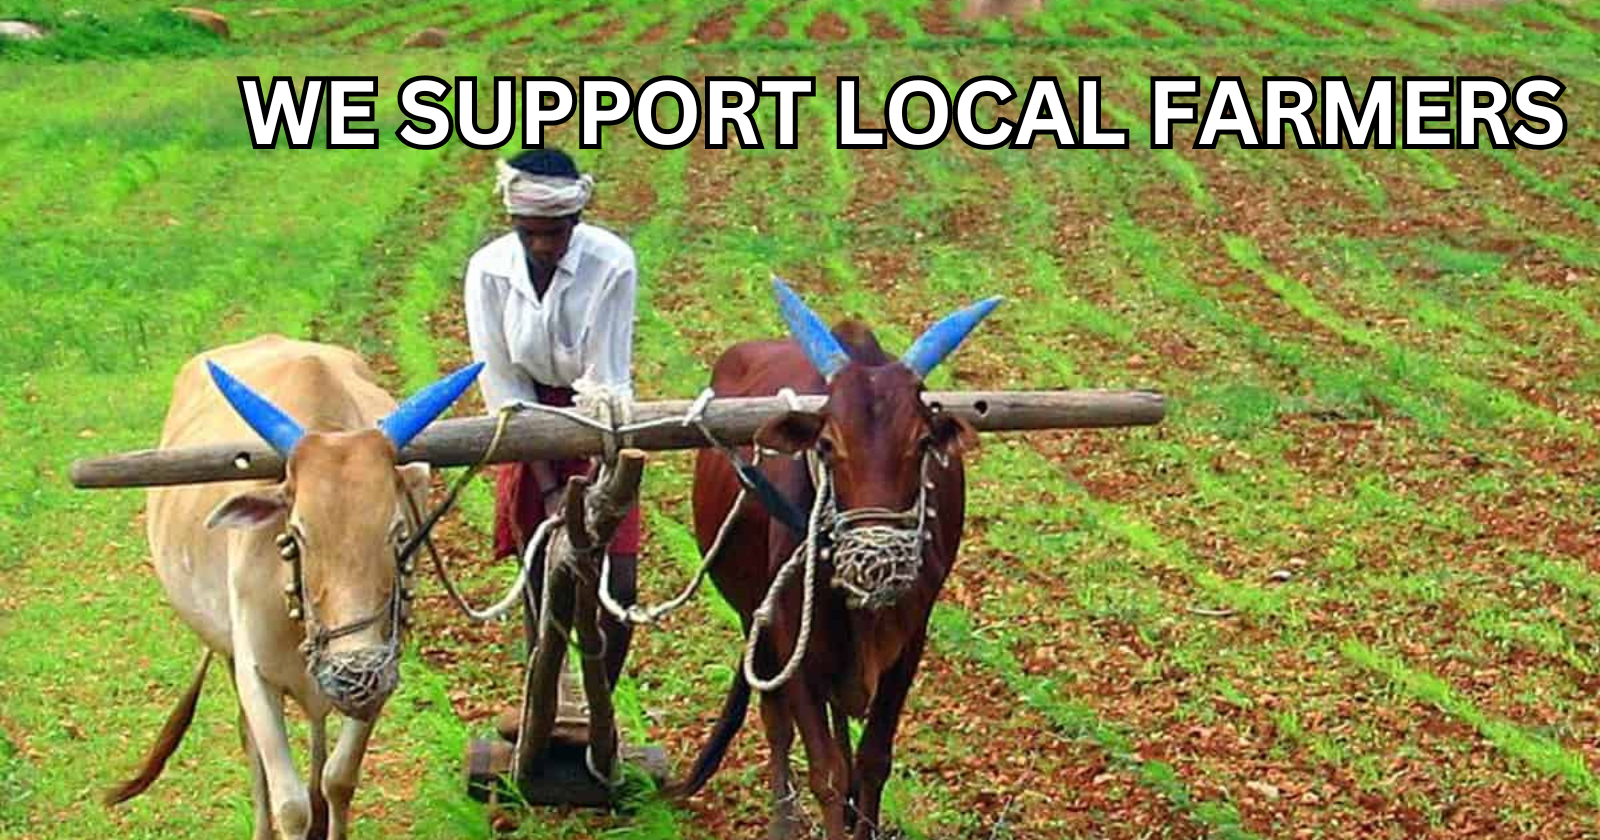 WE SUPPORT LOCAL FARMERS